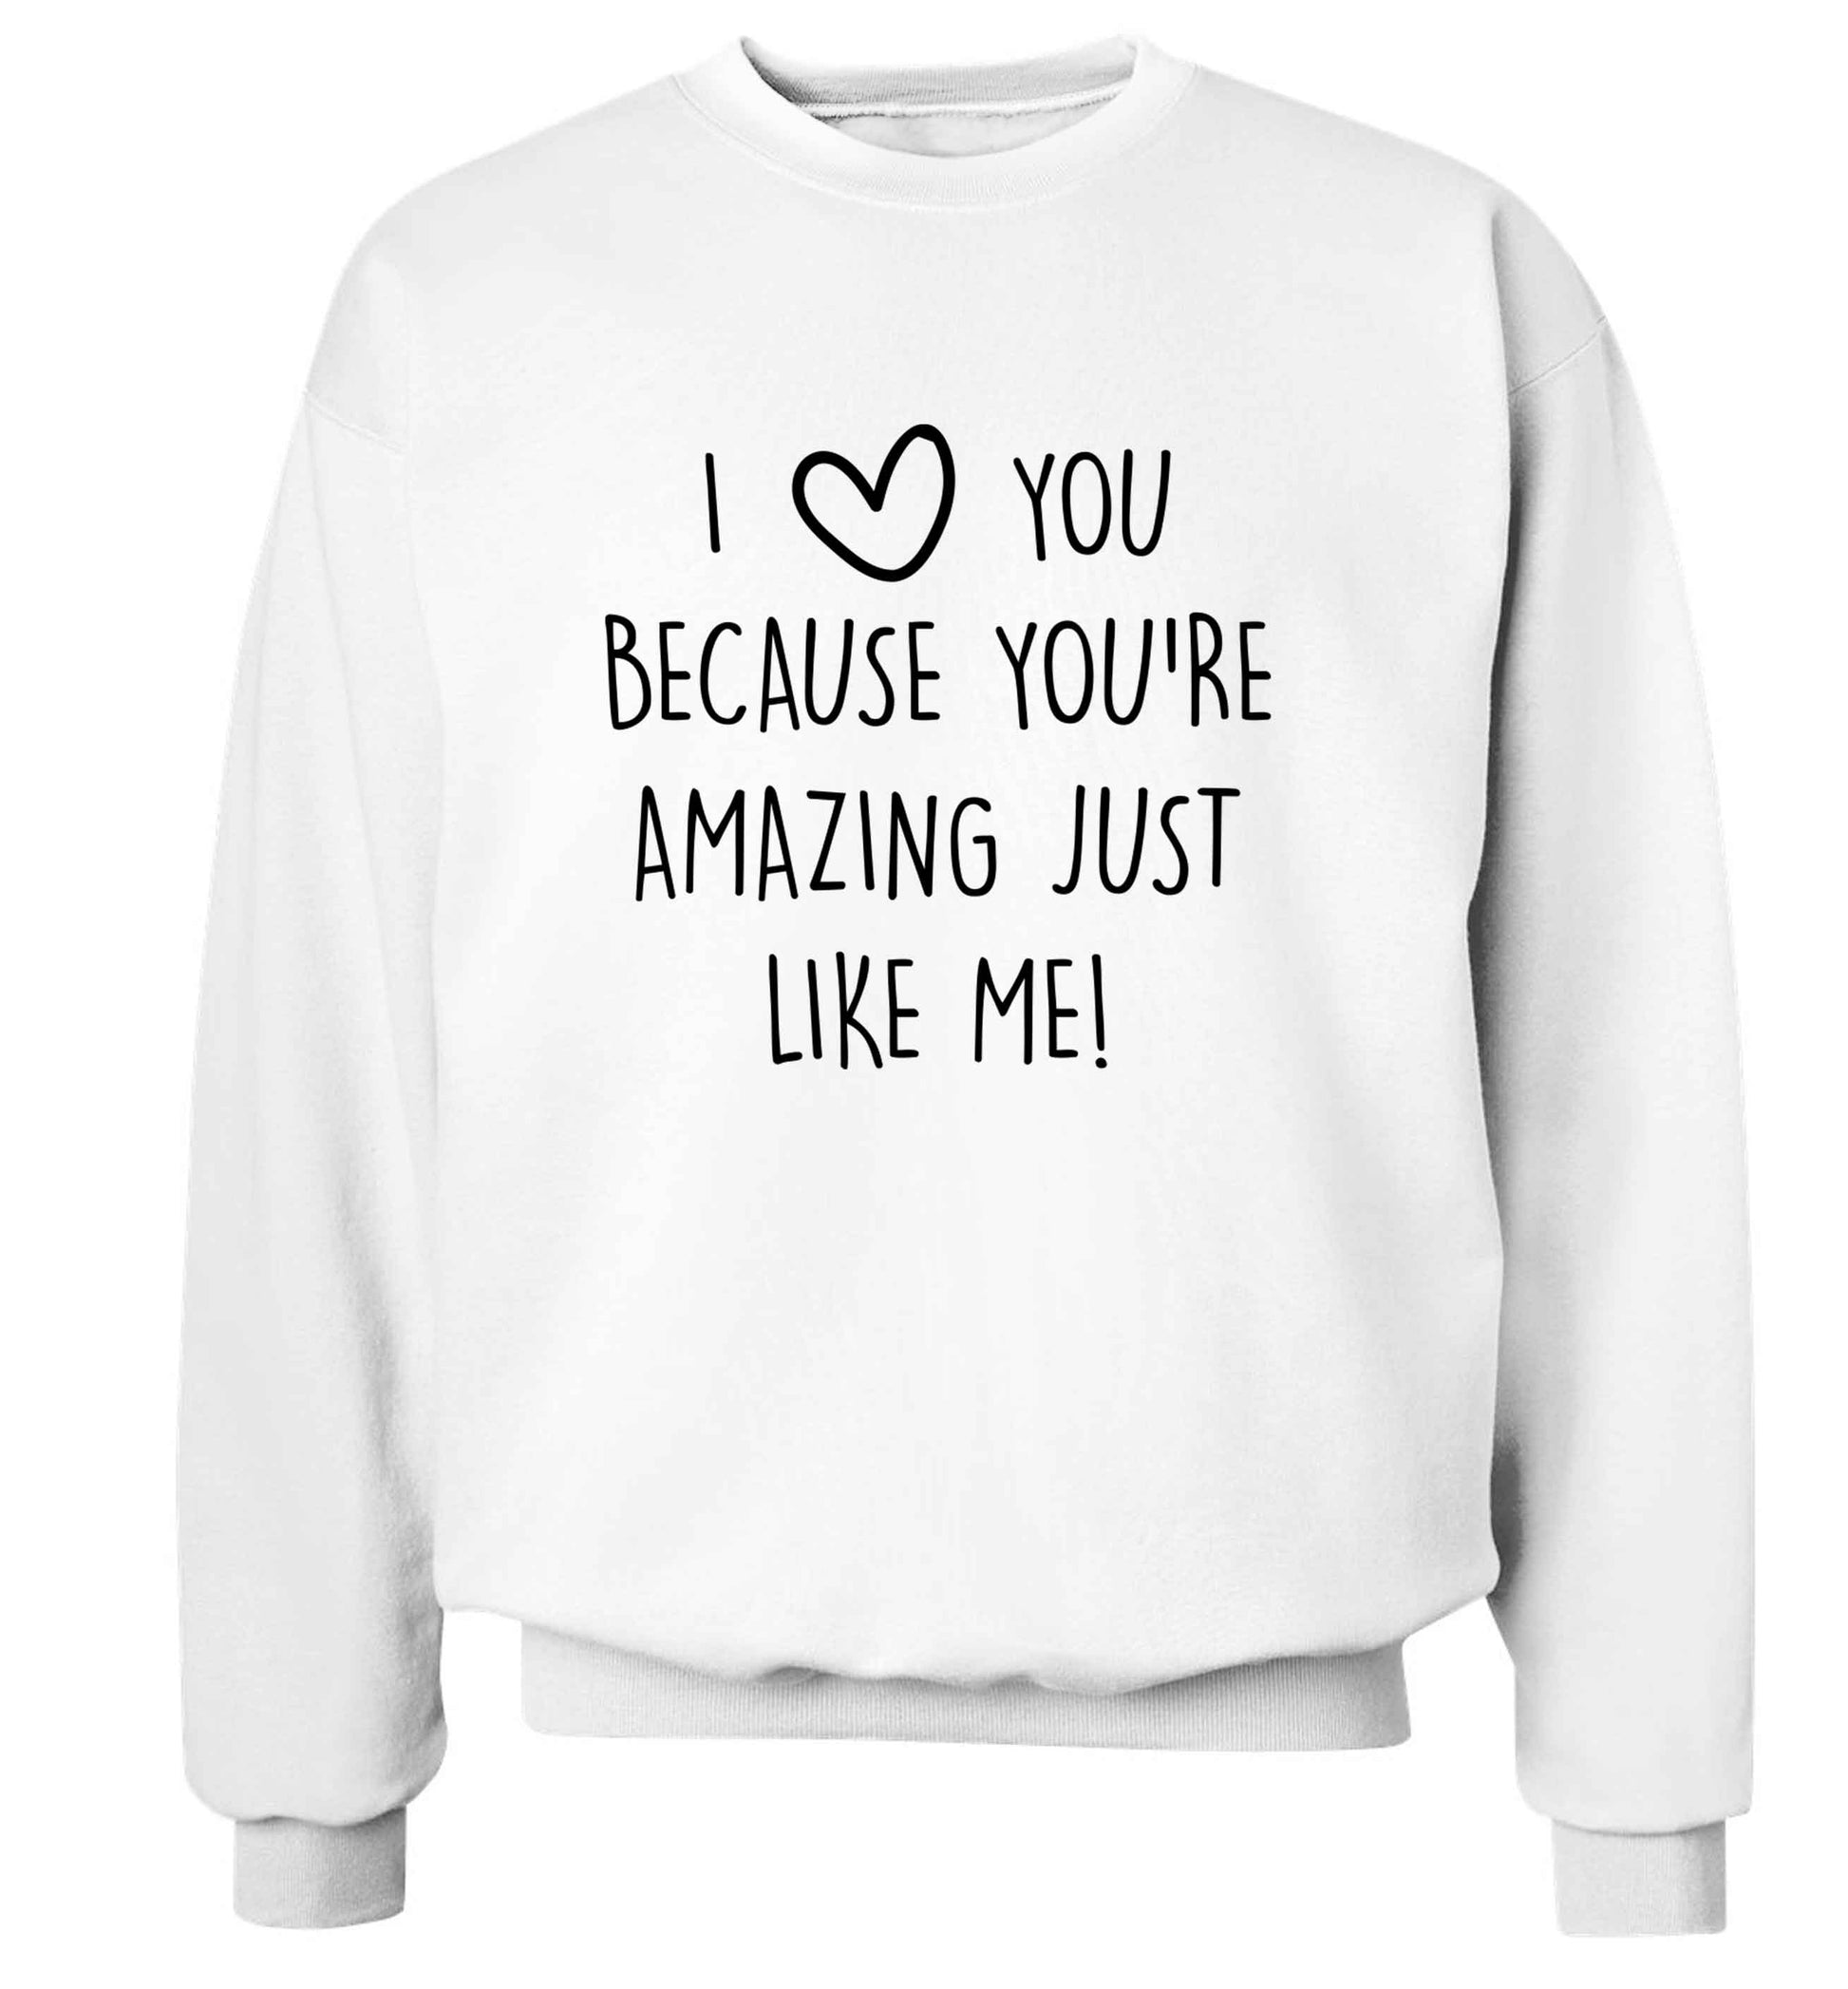 I love you because you're amazing just like me adult's unisex white sweater 2XL